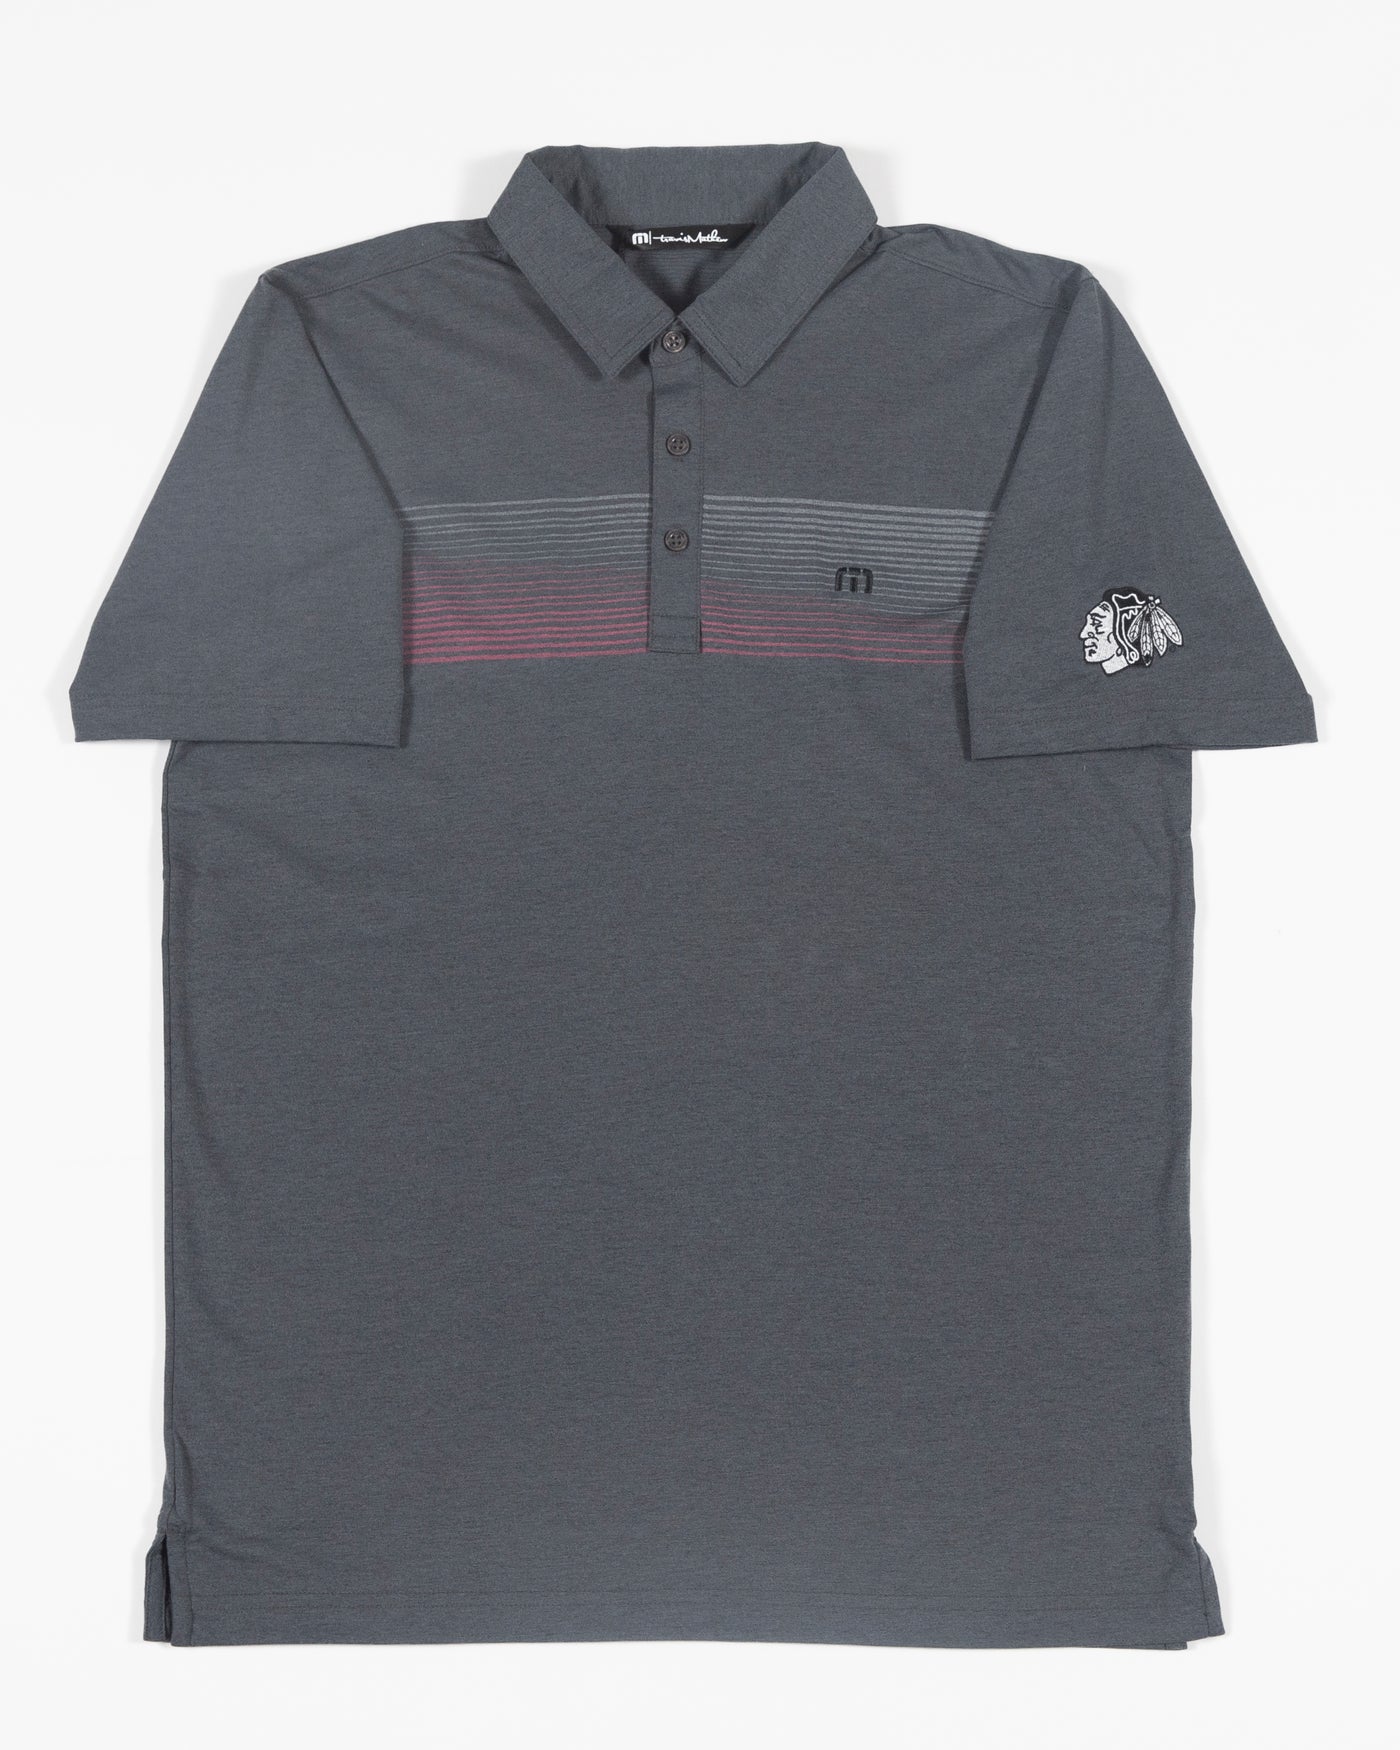 black TravisMathew polo with embroidered tonal primary logo on left shoulder - front lay flat